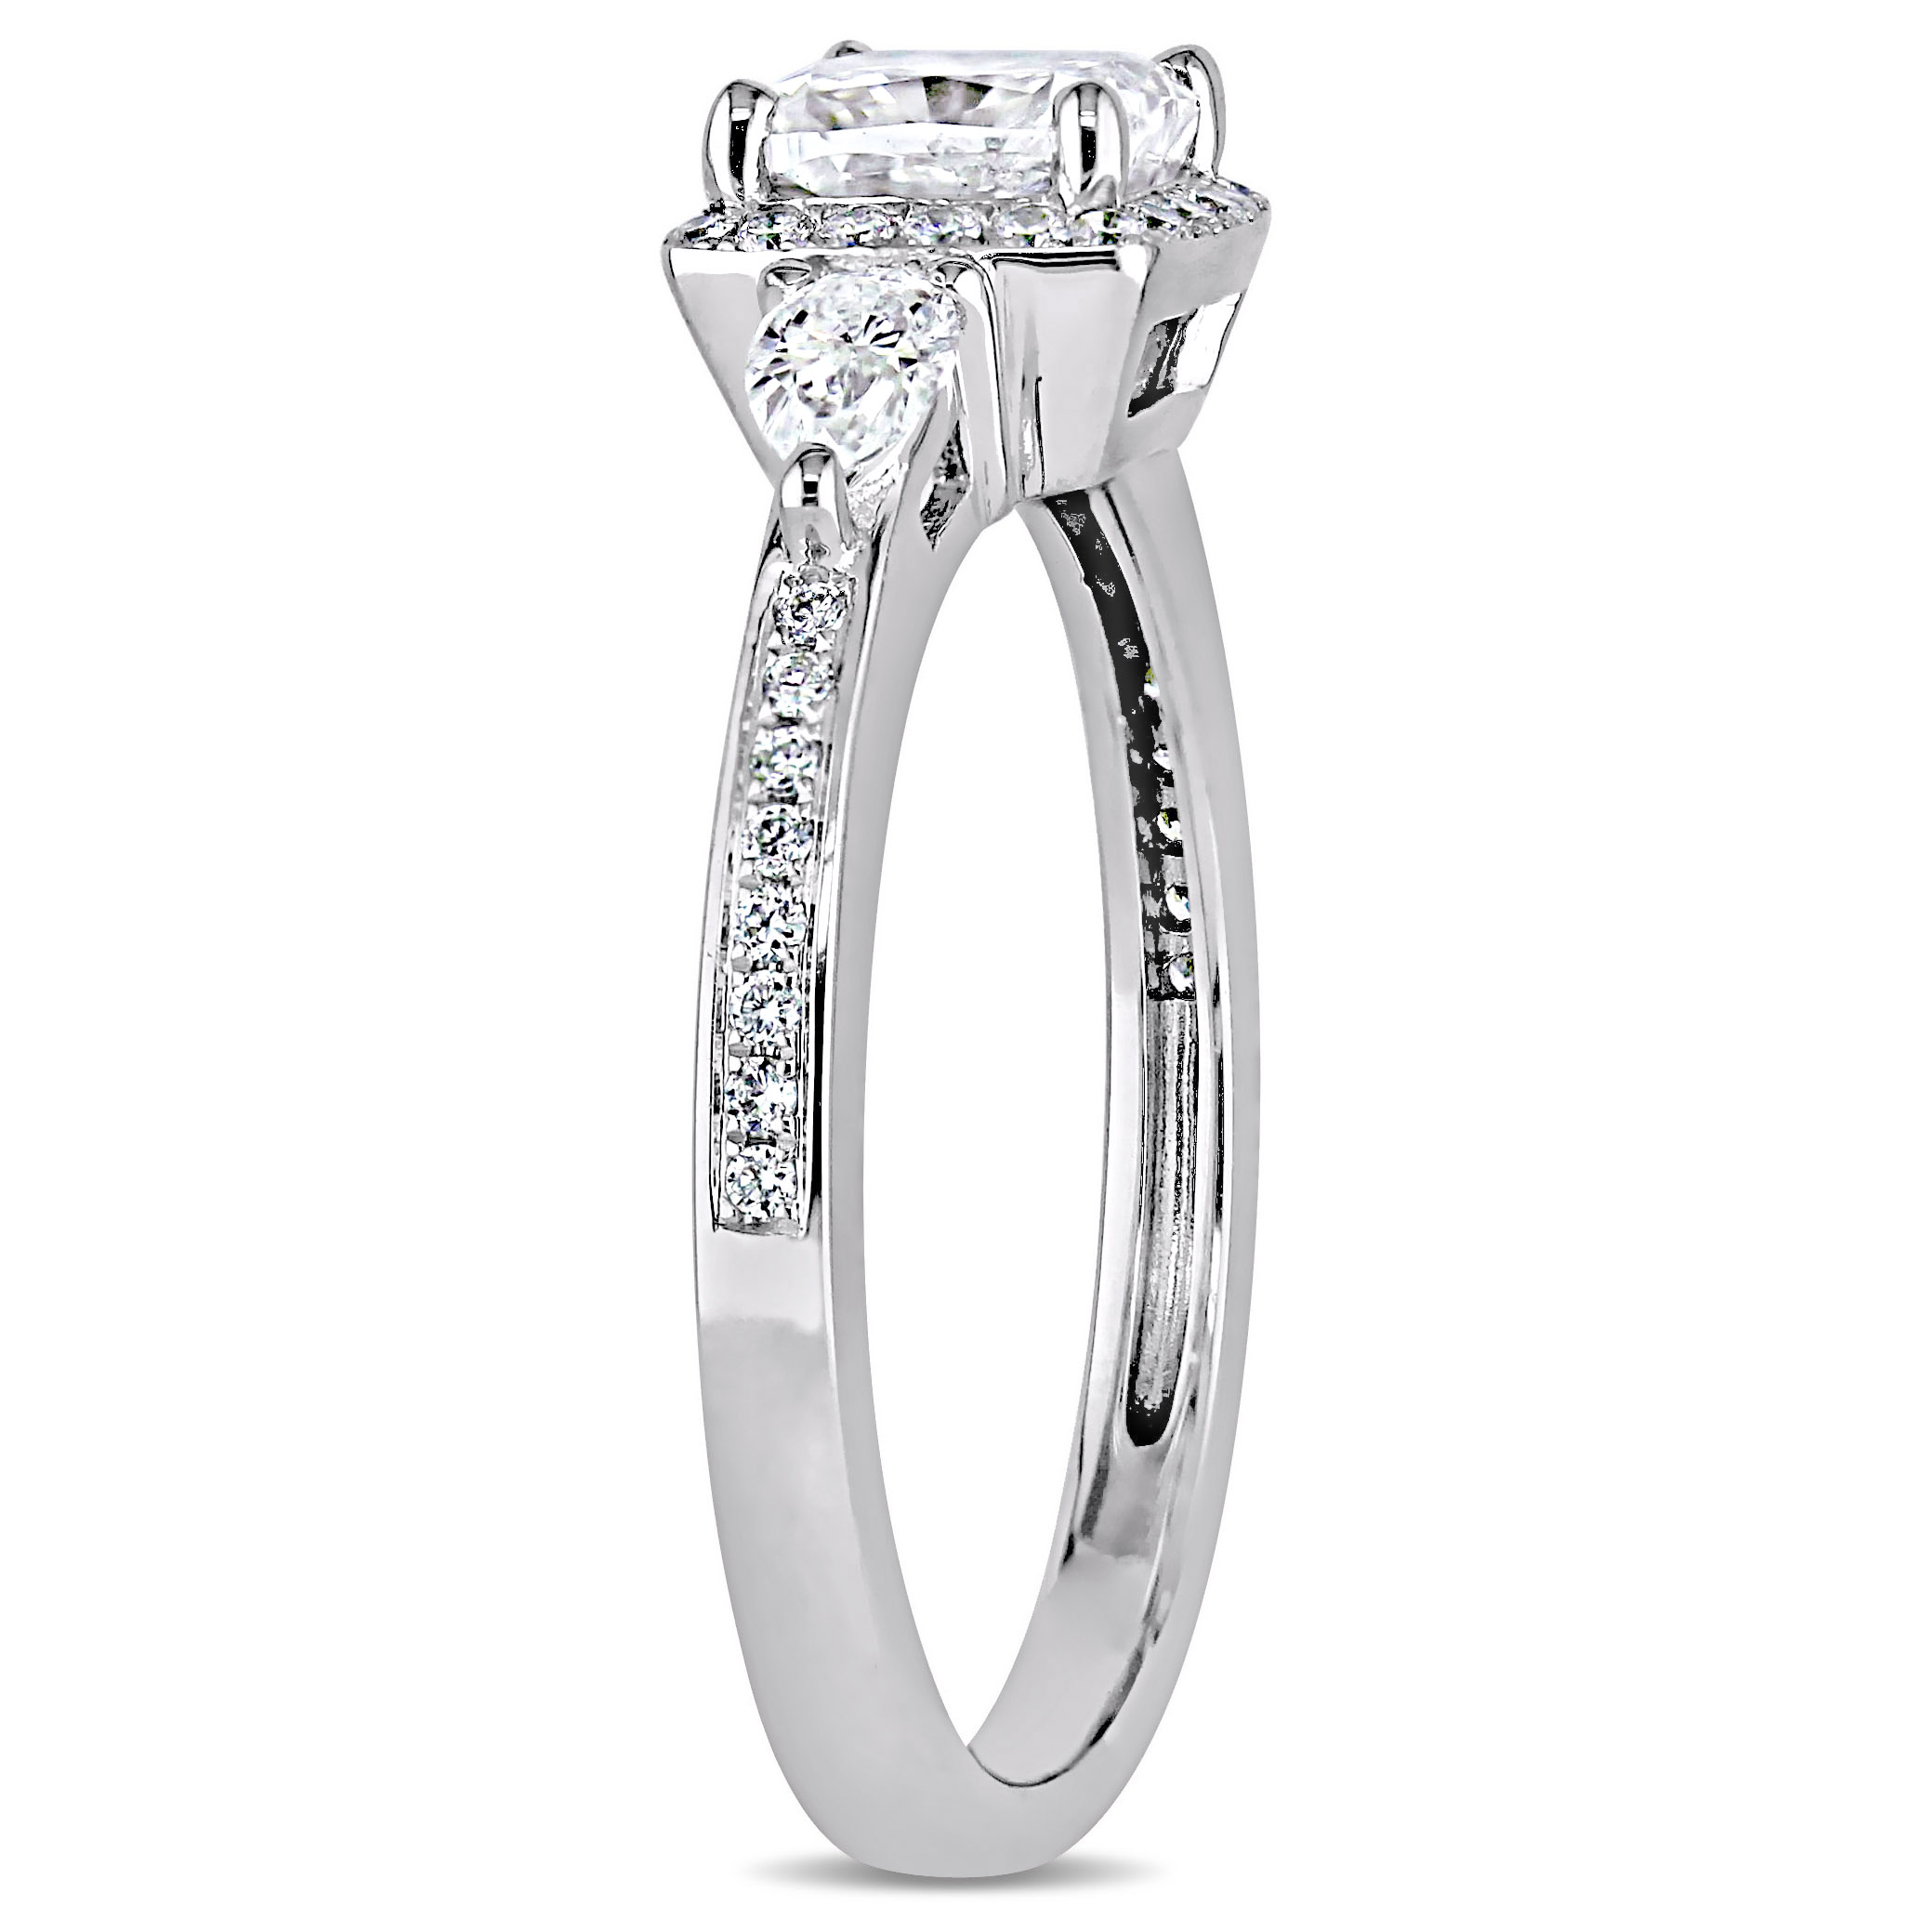 1 3/8 CT TW Cushion and Pear Cut 3 Stone Engagement Ring with Diamond Accent and Halo in 14k White Gold